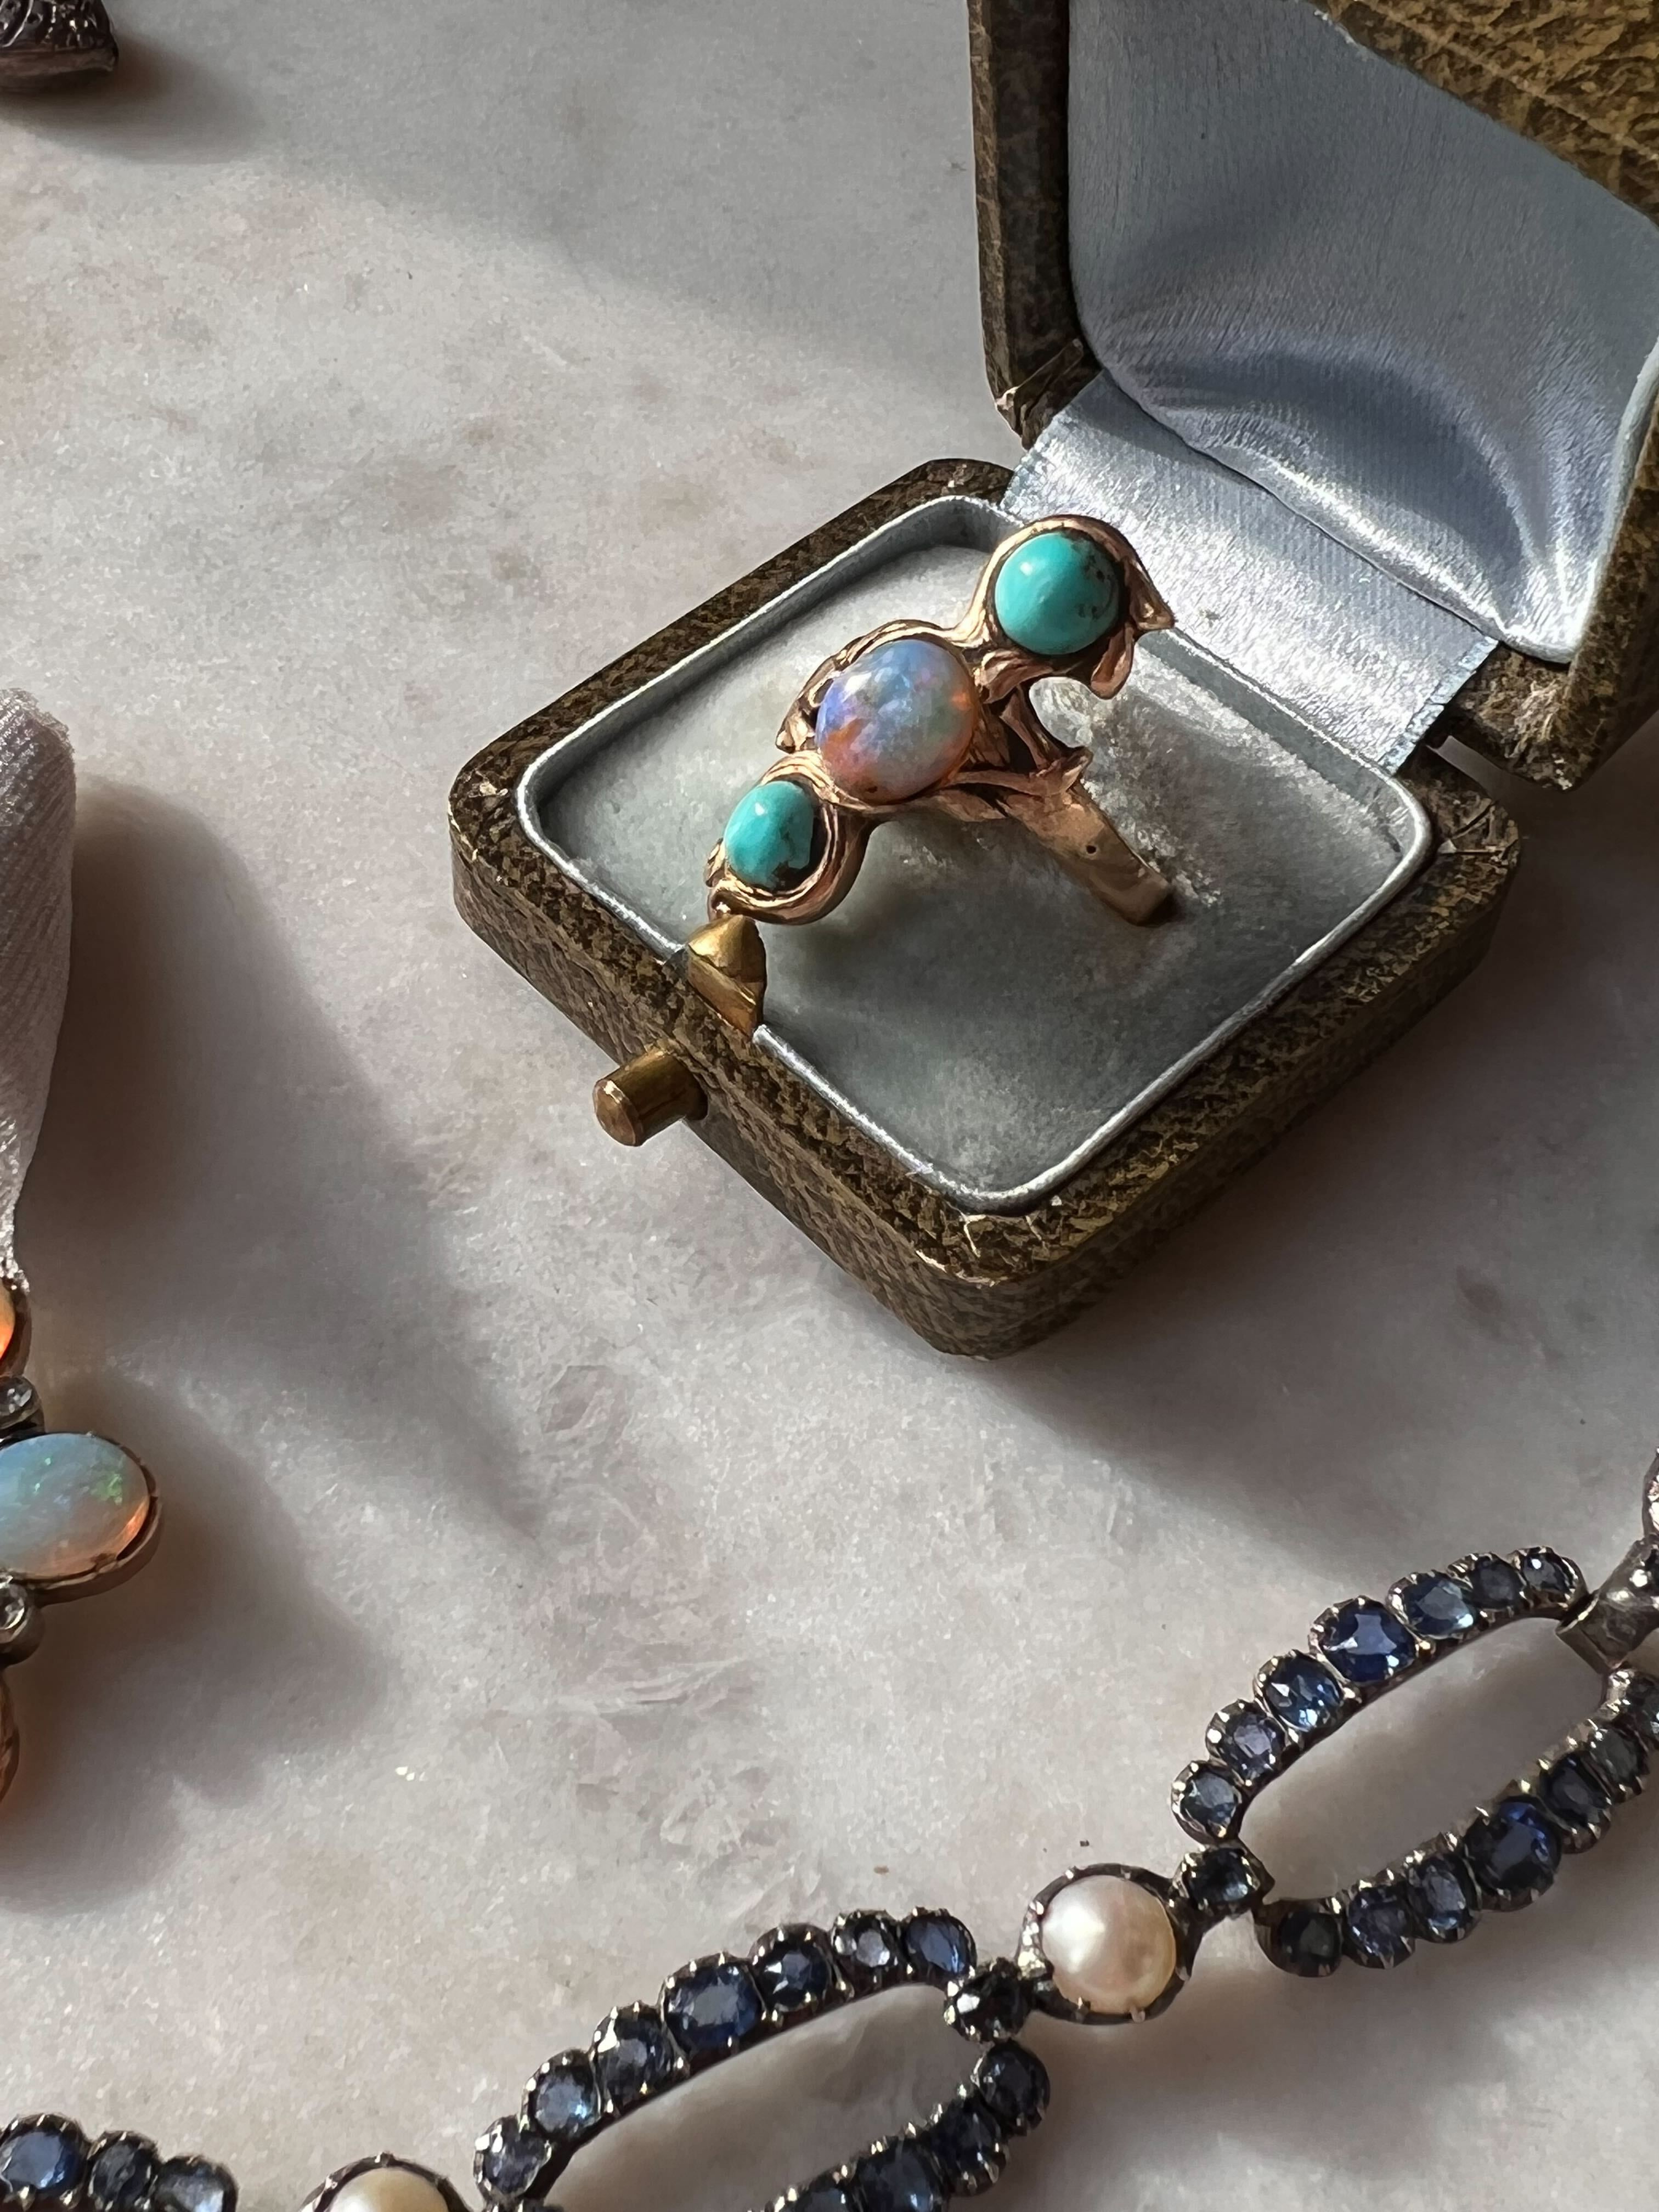 Exceptional Victorian Arts + Crafts Movement Opal and Turquoise Ring